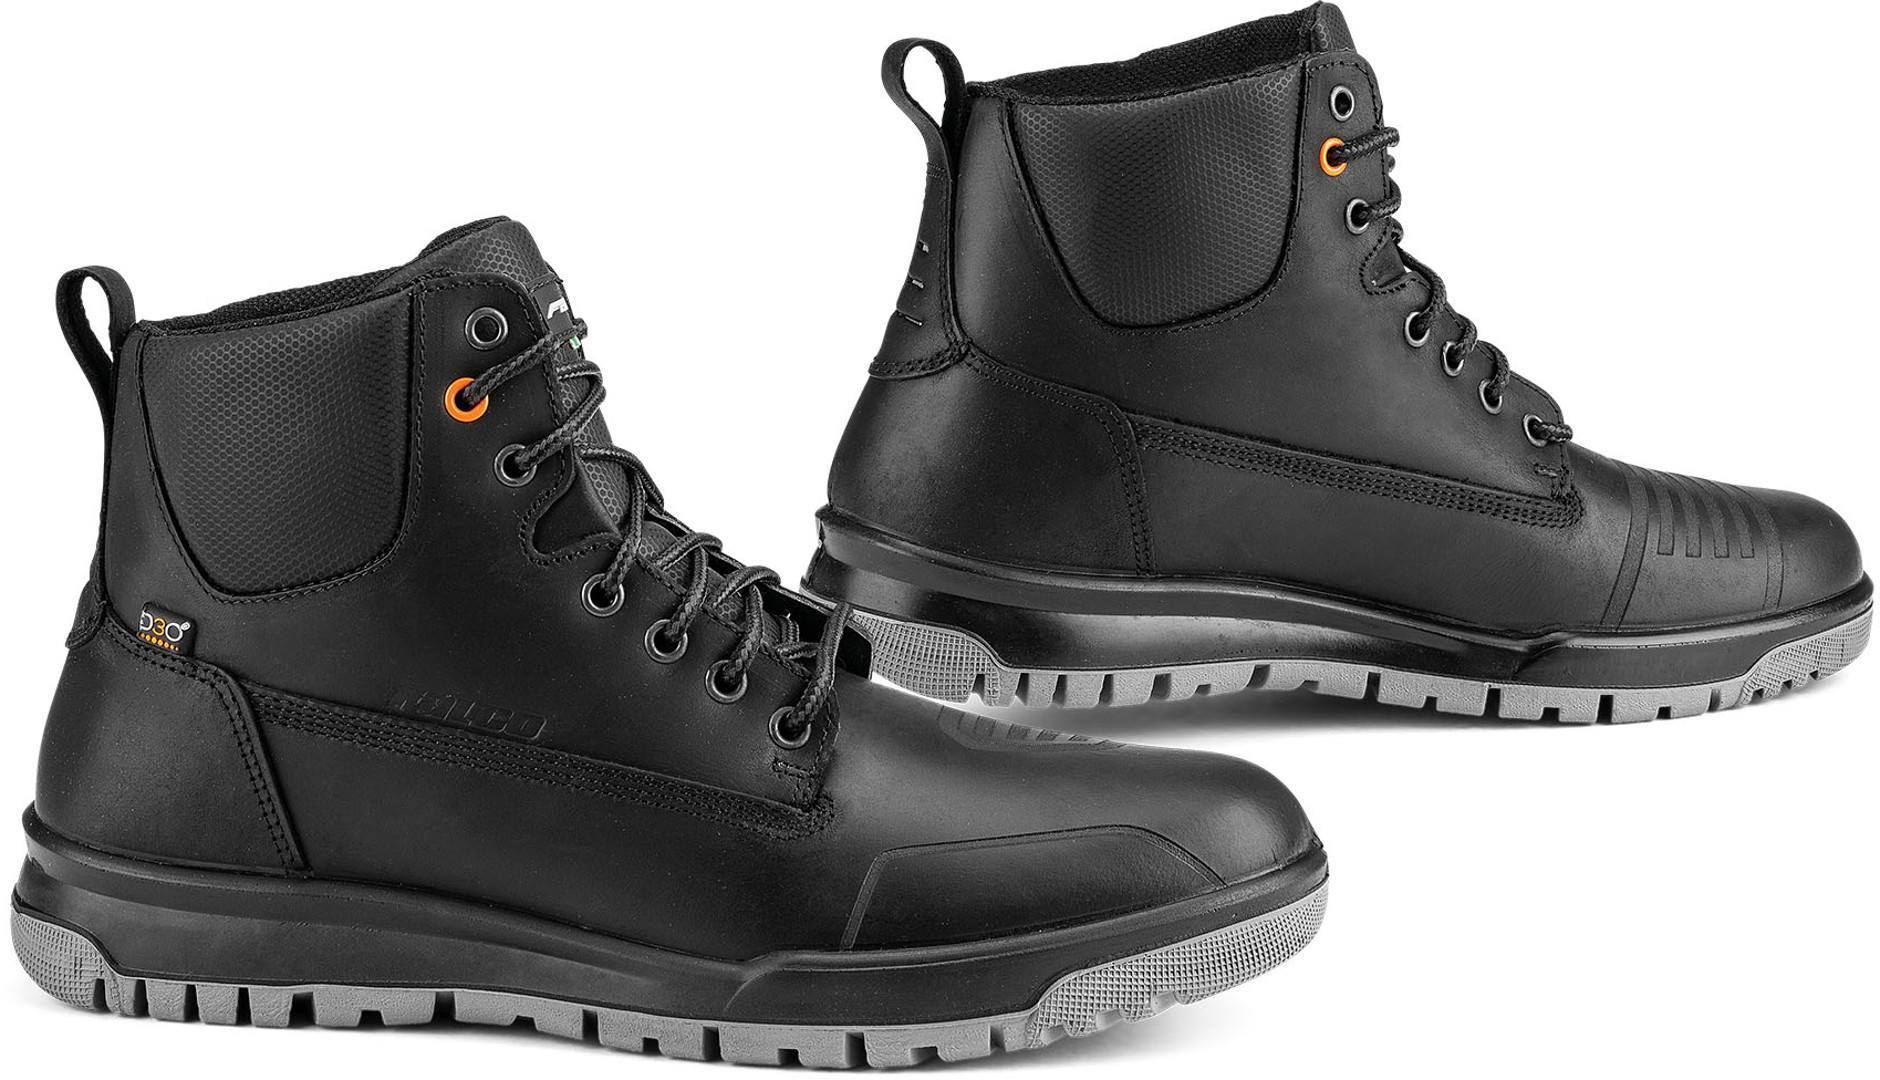 Photos - Motorcycle Boots Falco Patrol Motorcycle Shoes Unisex Black Size: 46 5050874146 